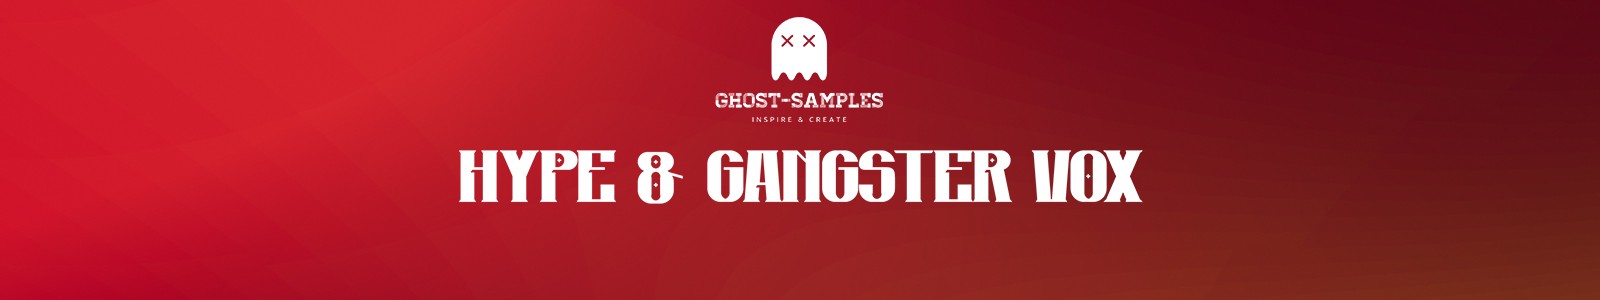 Hype & Gangster Vox Reworked by Ghost Samples